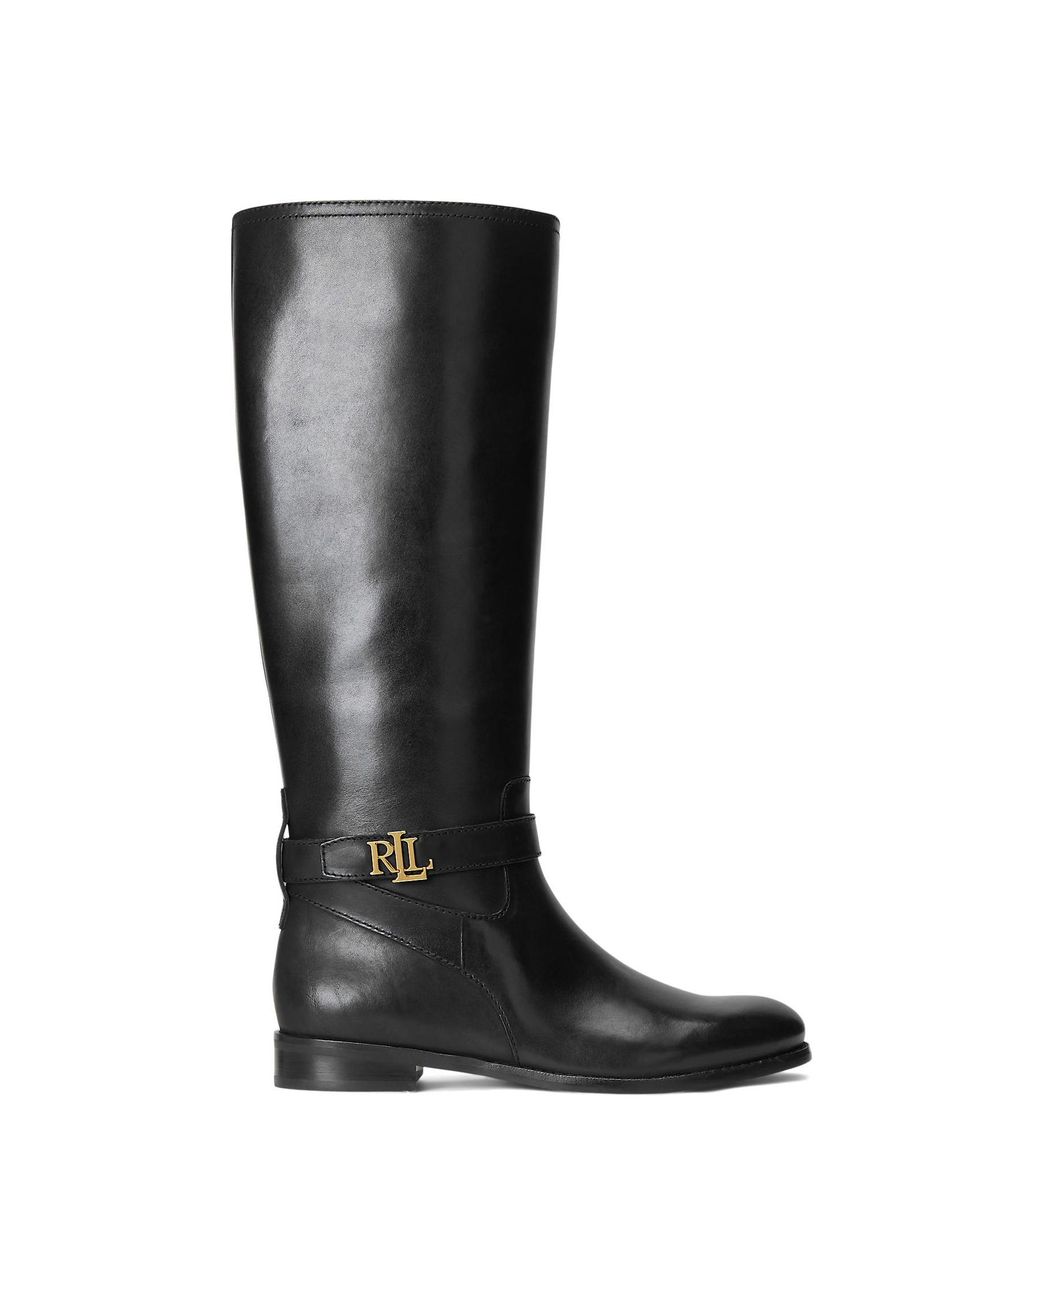 Lauren by Ralph Lauren Brittaney Tall Burnished Leather Riding Boots in ...